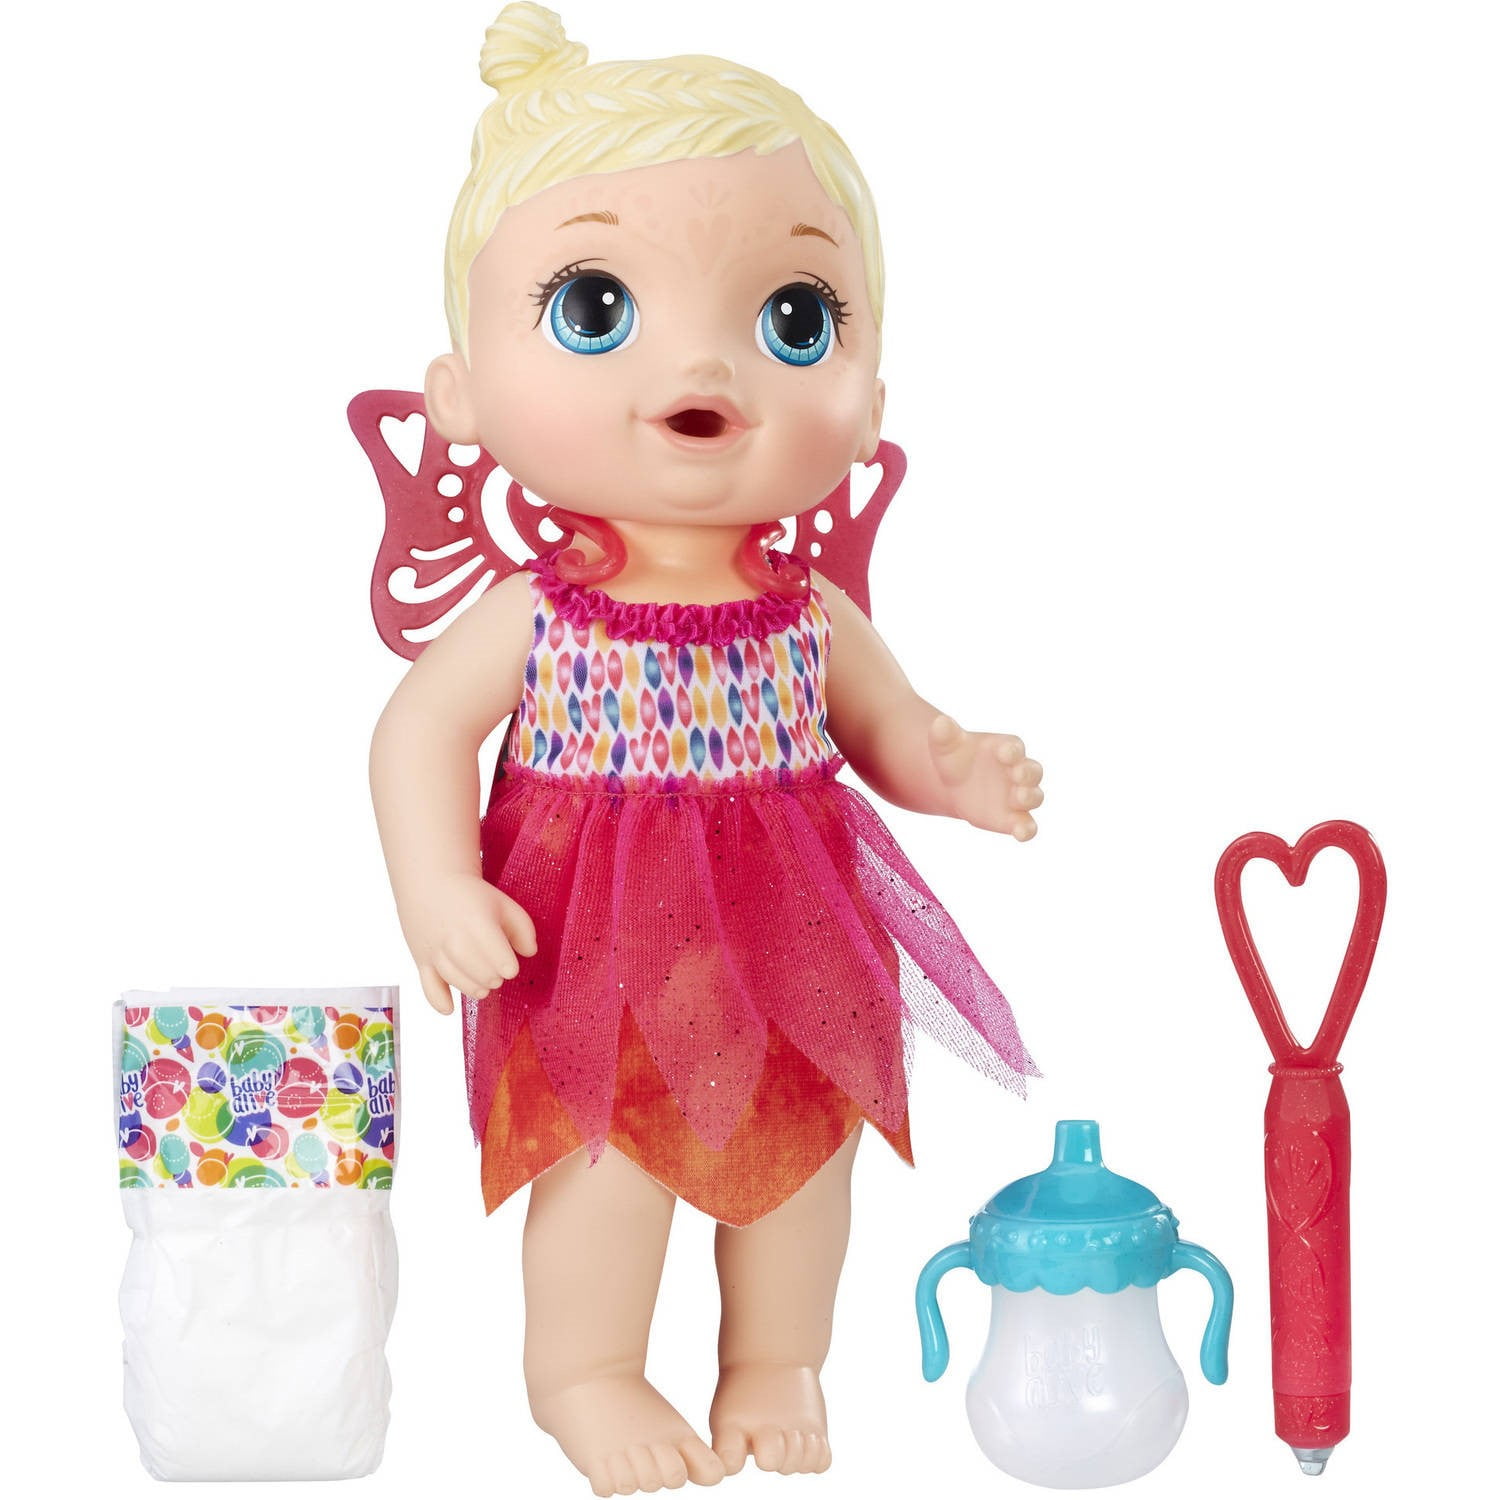 Details about   Baby Alive Lil' Sips Blonde Baby Doll New 